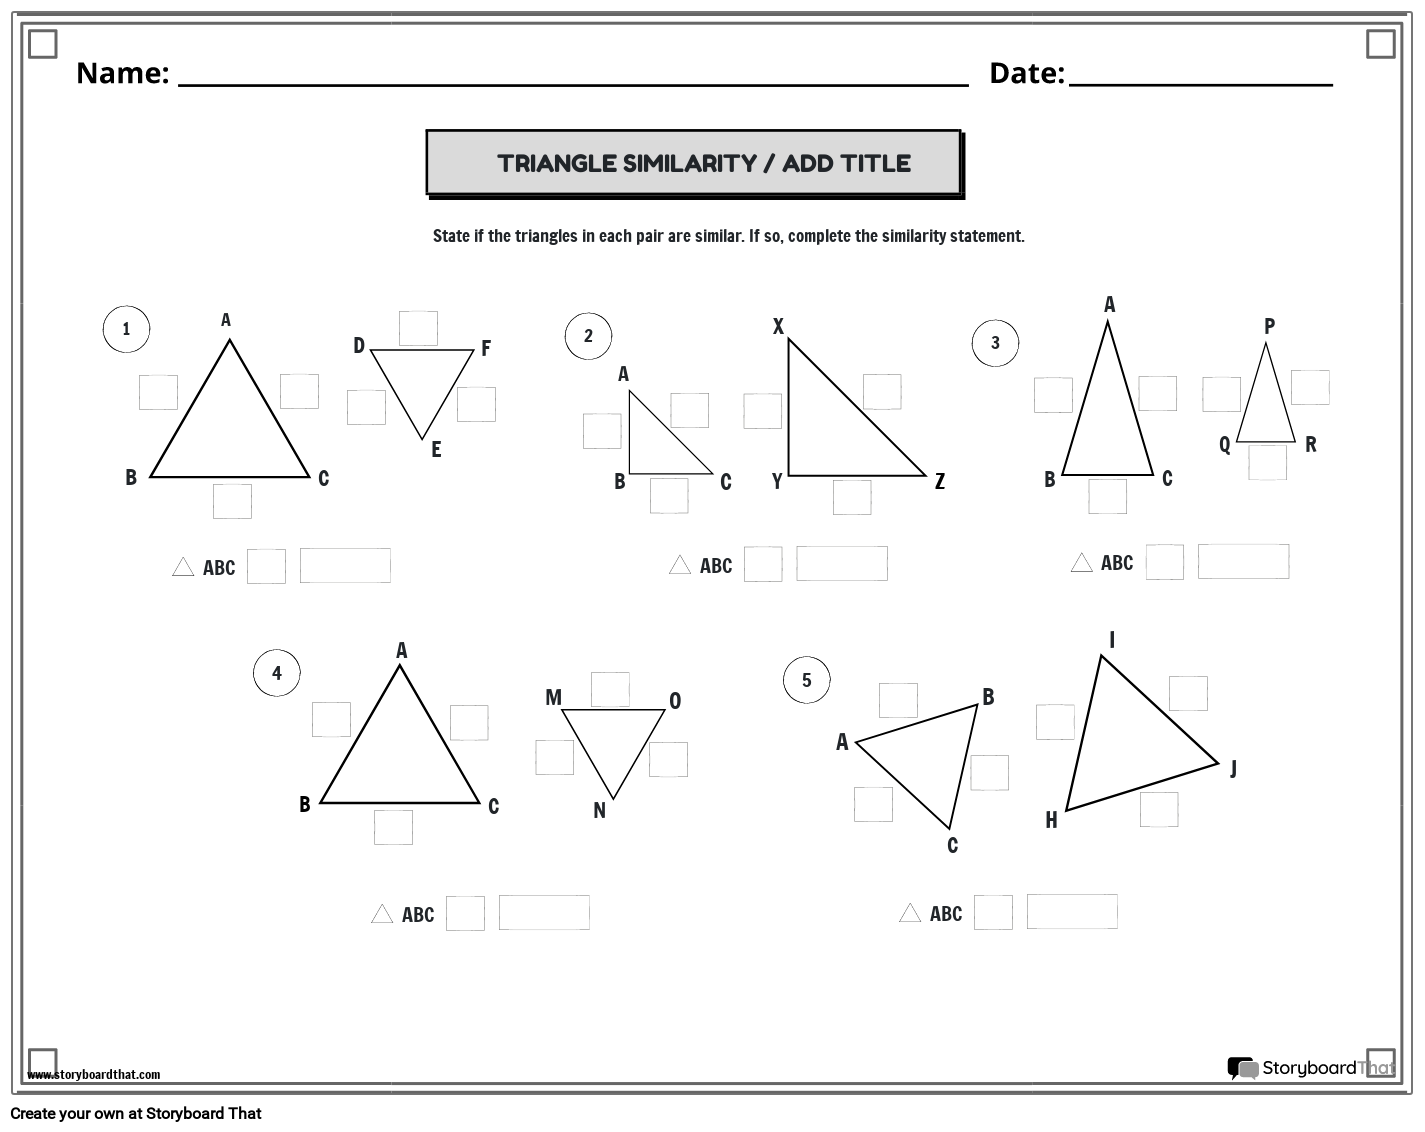 SIMILAR TRIANGLES WORKSHEET with Border - BW